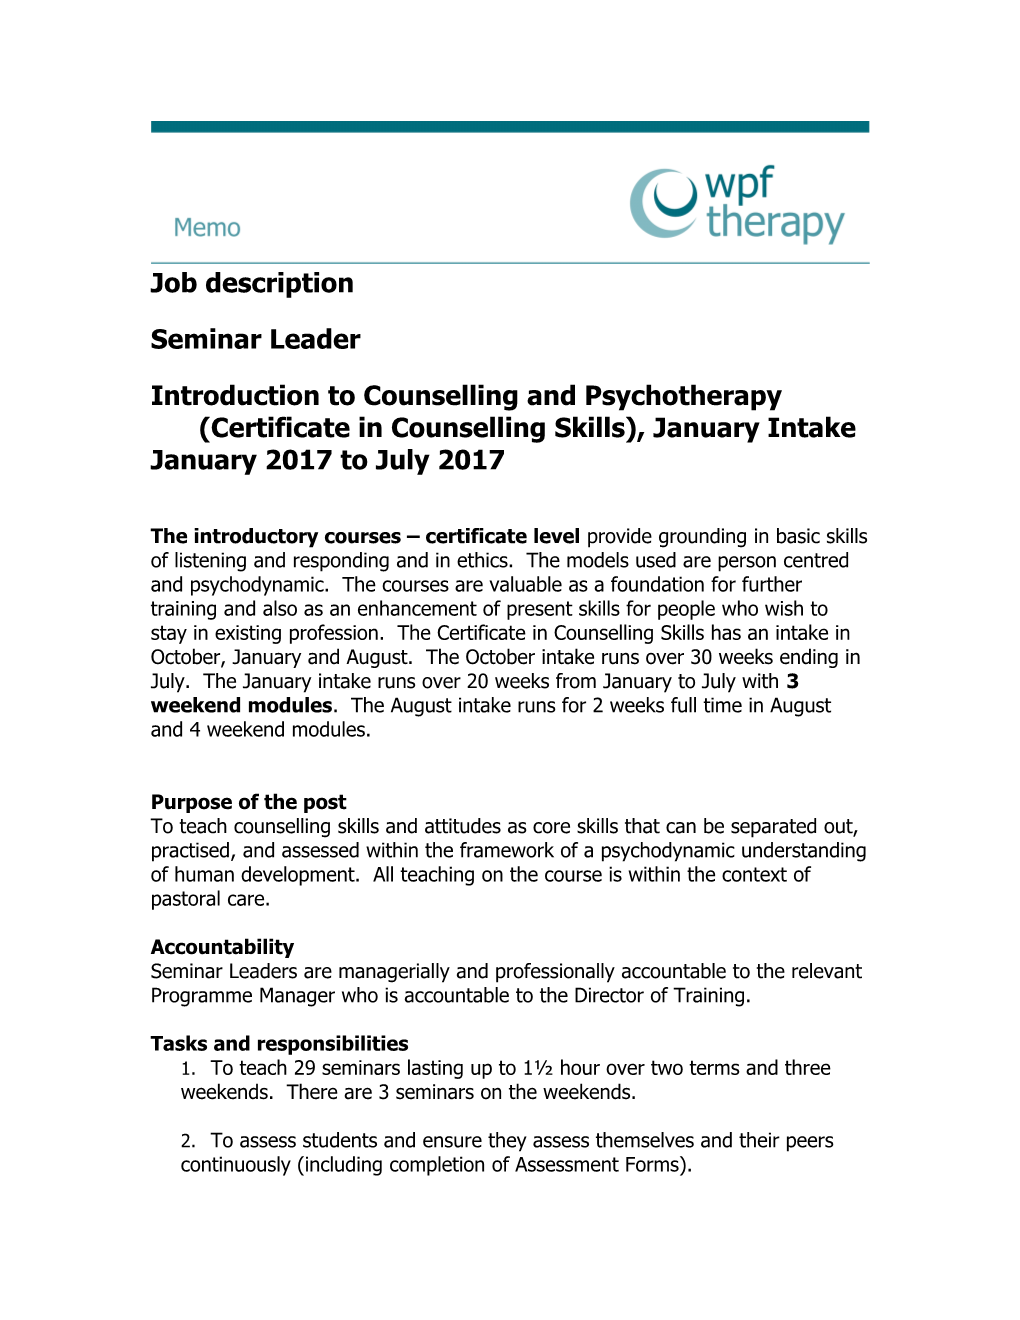 Introduction to Counselling and Psychotherapy (Certificate in Counselling Skills), January